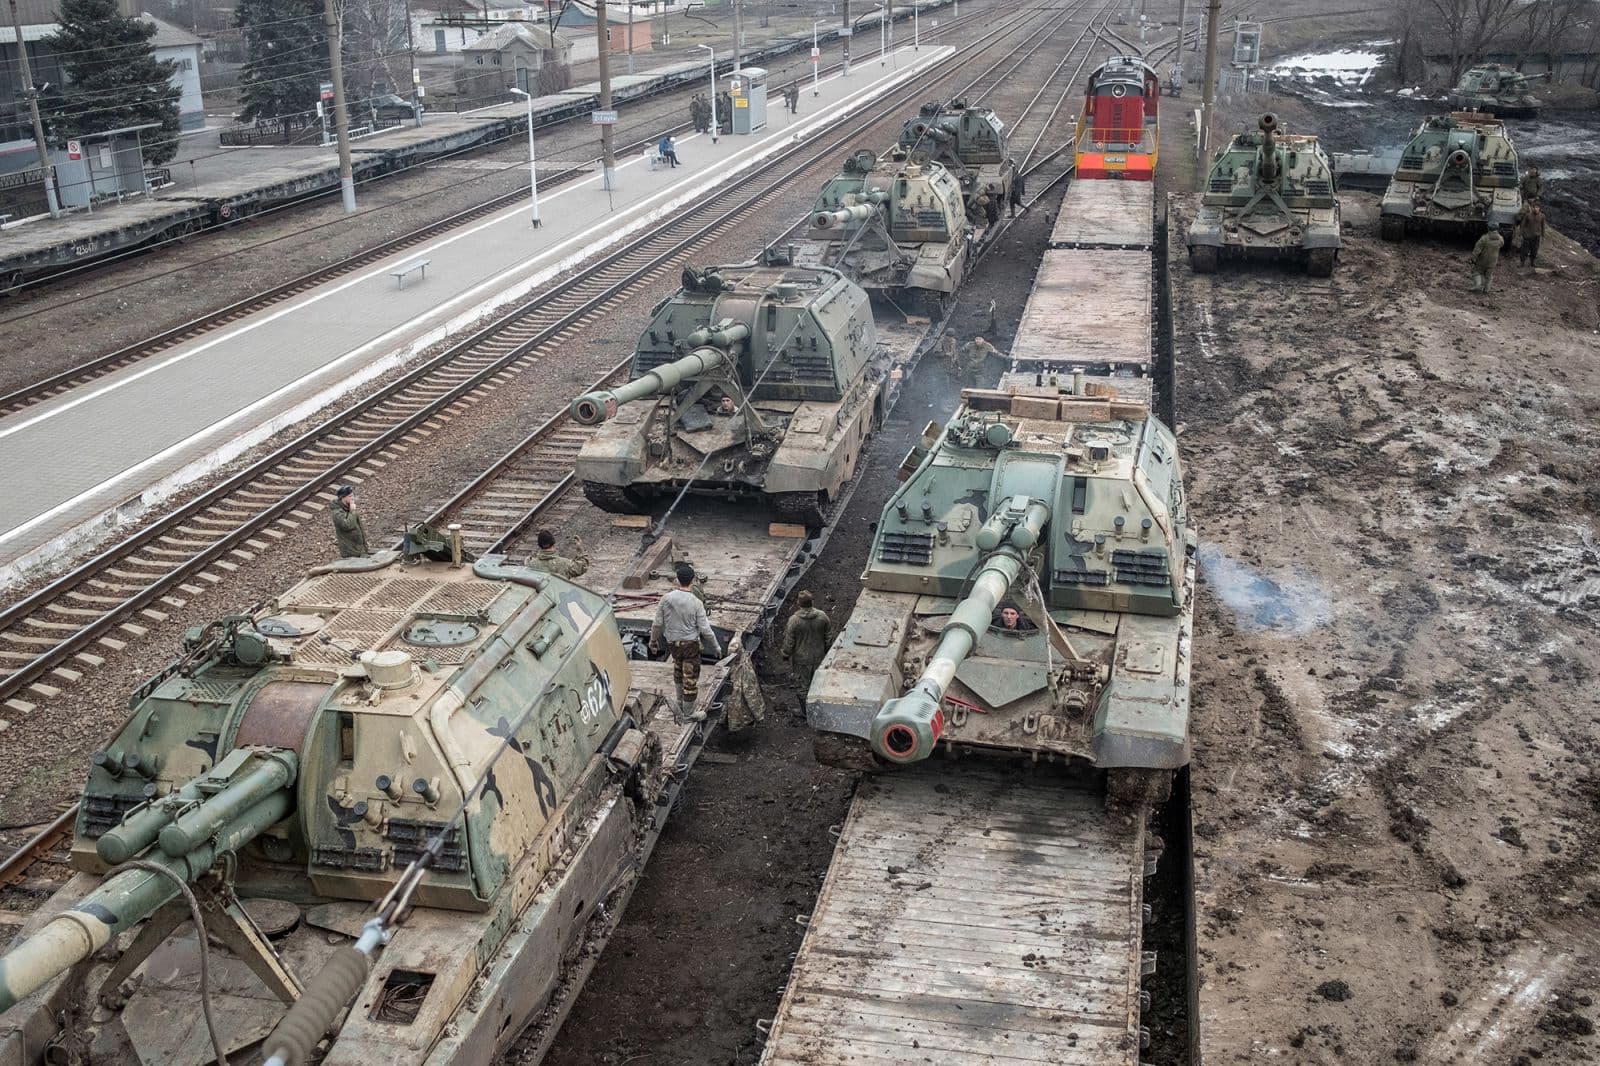 Russian howitzers are loaded onto train cars near Taganrog